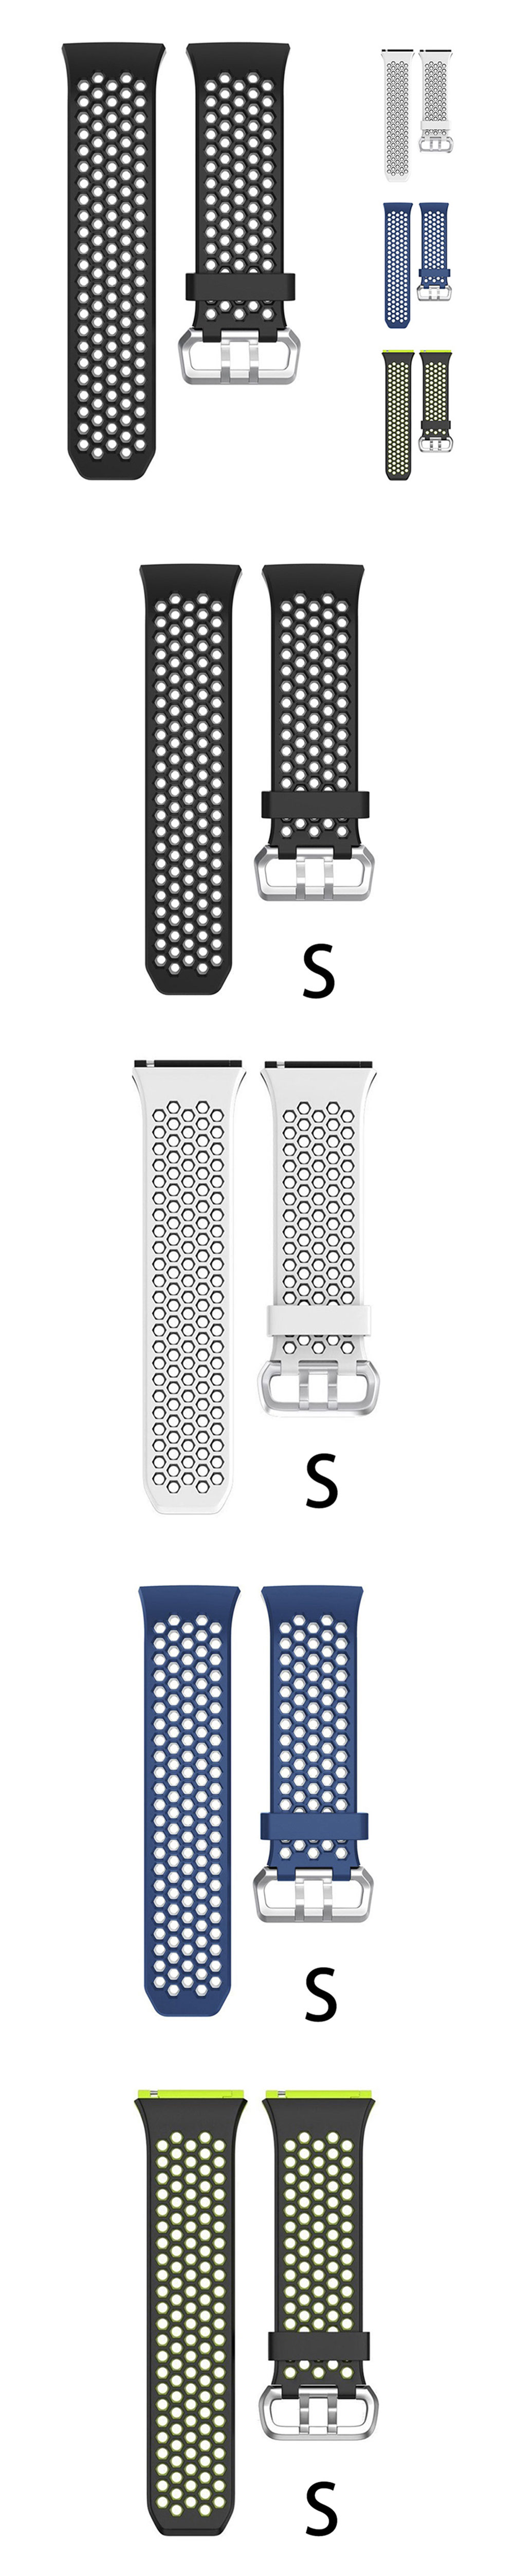 22mm-Small-Size-Watch-Band-Silicone-Strap-Replacement-for-Fitbit-Ionic-Smart-Watch-1289482-2